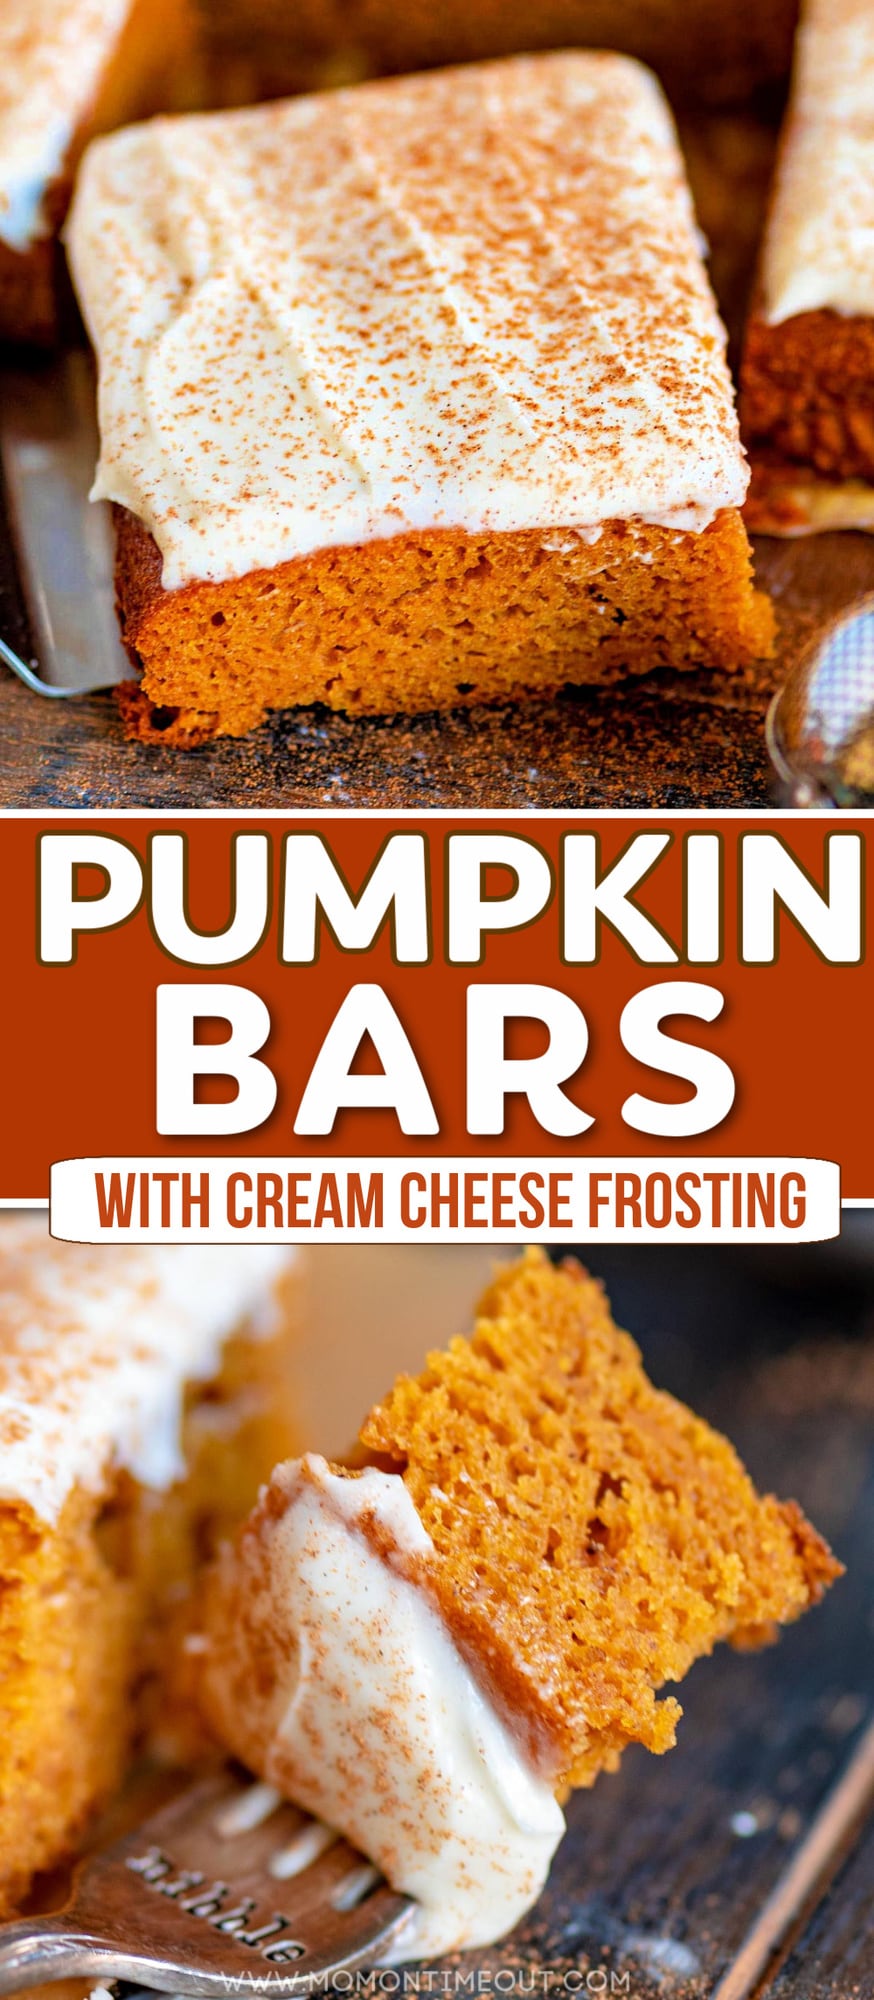 The BEST Pumpkin Bars | Mom On Timeout